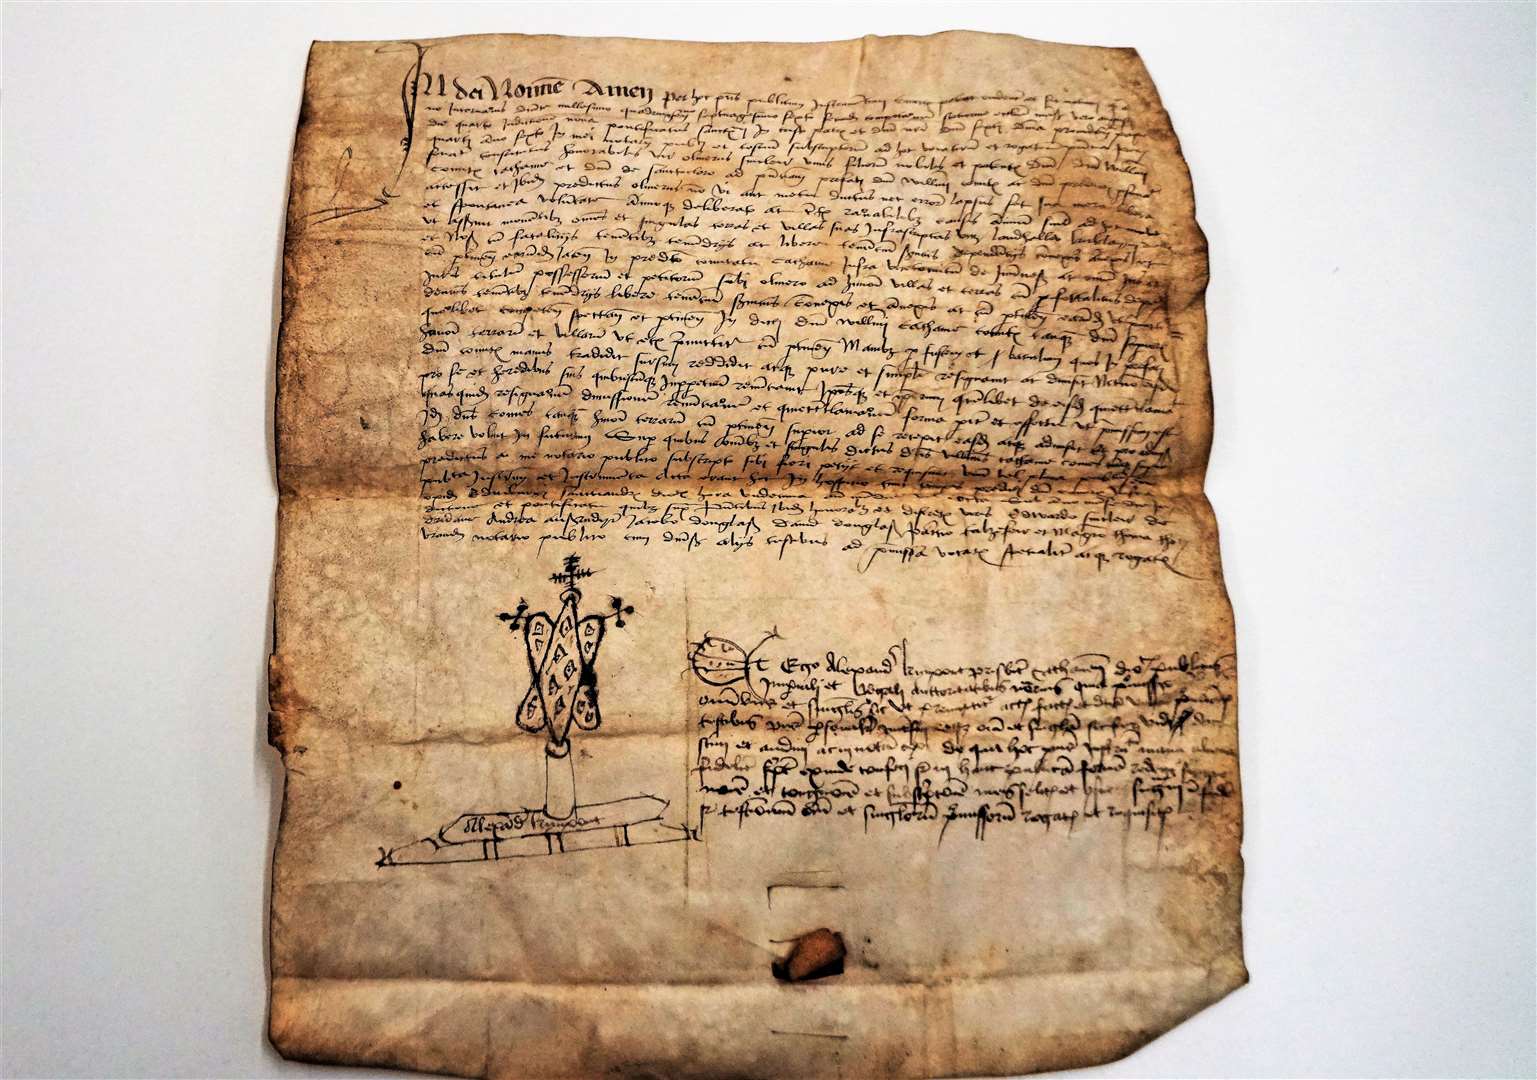 The 1476 document is considered to be of national importance but had been mislaid for many years. Picture: DGS